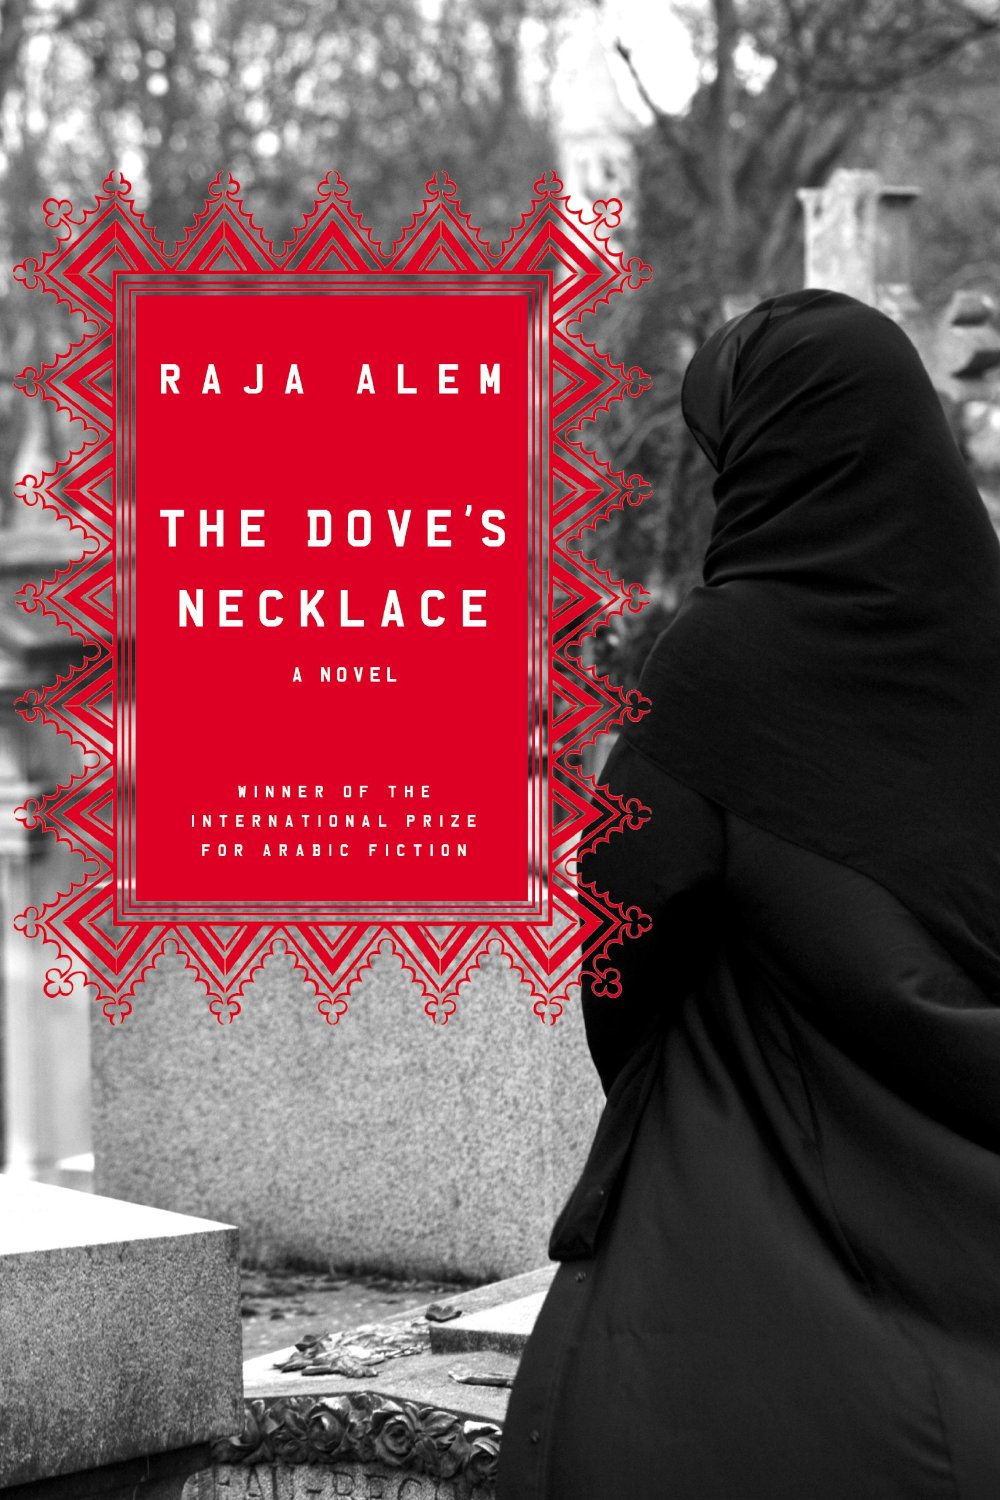 Cover of the book "The Dove's Necklace"